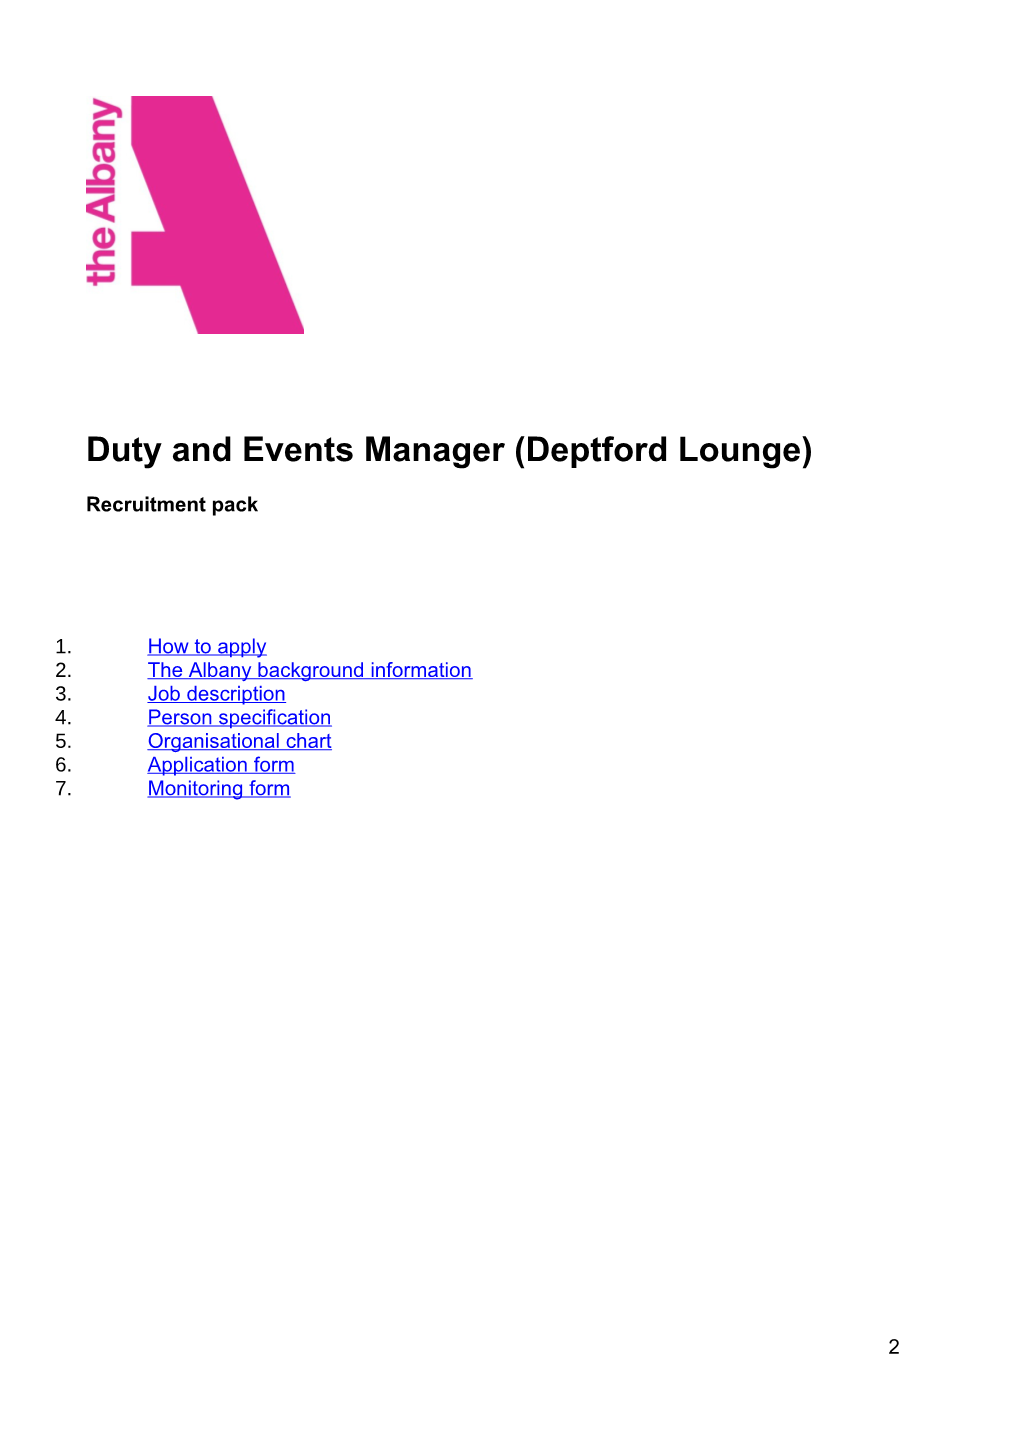 Duty and Events Manager (Deptford Lounge)